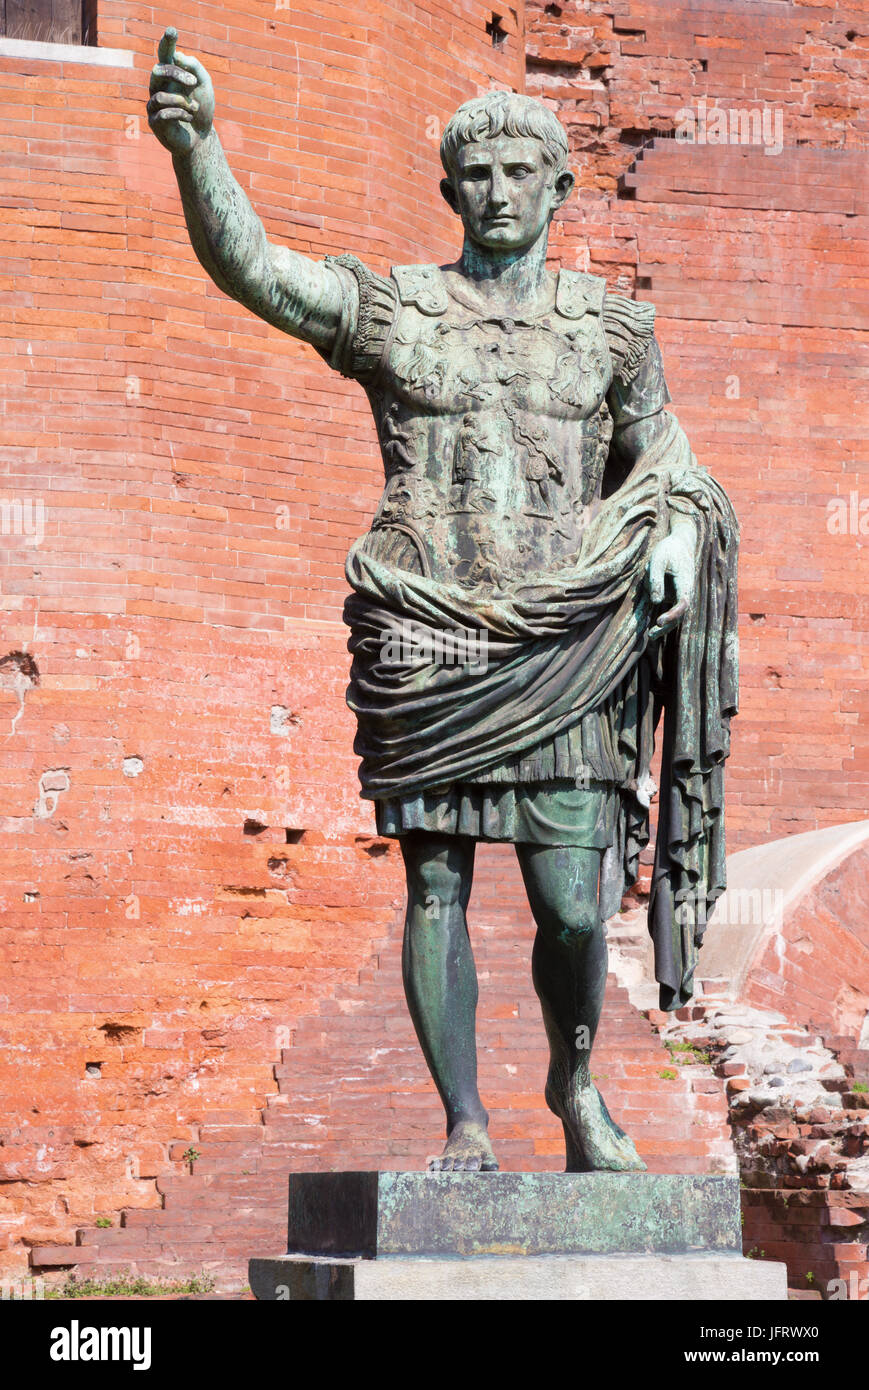 Turin - The bronze statue of emperor Octavianus Augustus in front of The Palatine Gate as the copy of marble stutue in Vaticans Museum in Rome from 1. Stock Photo